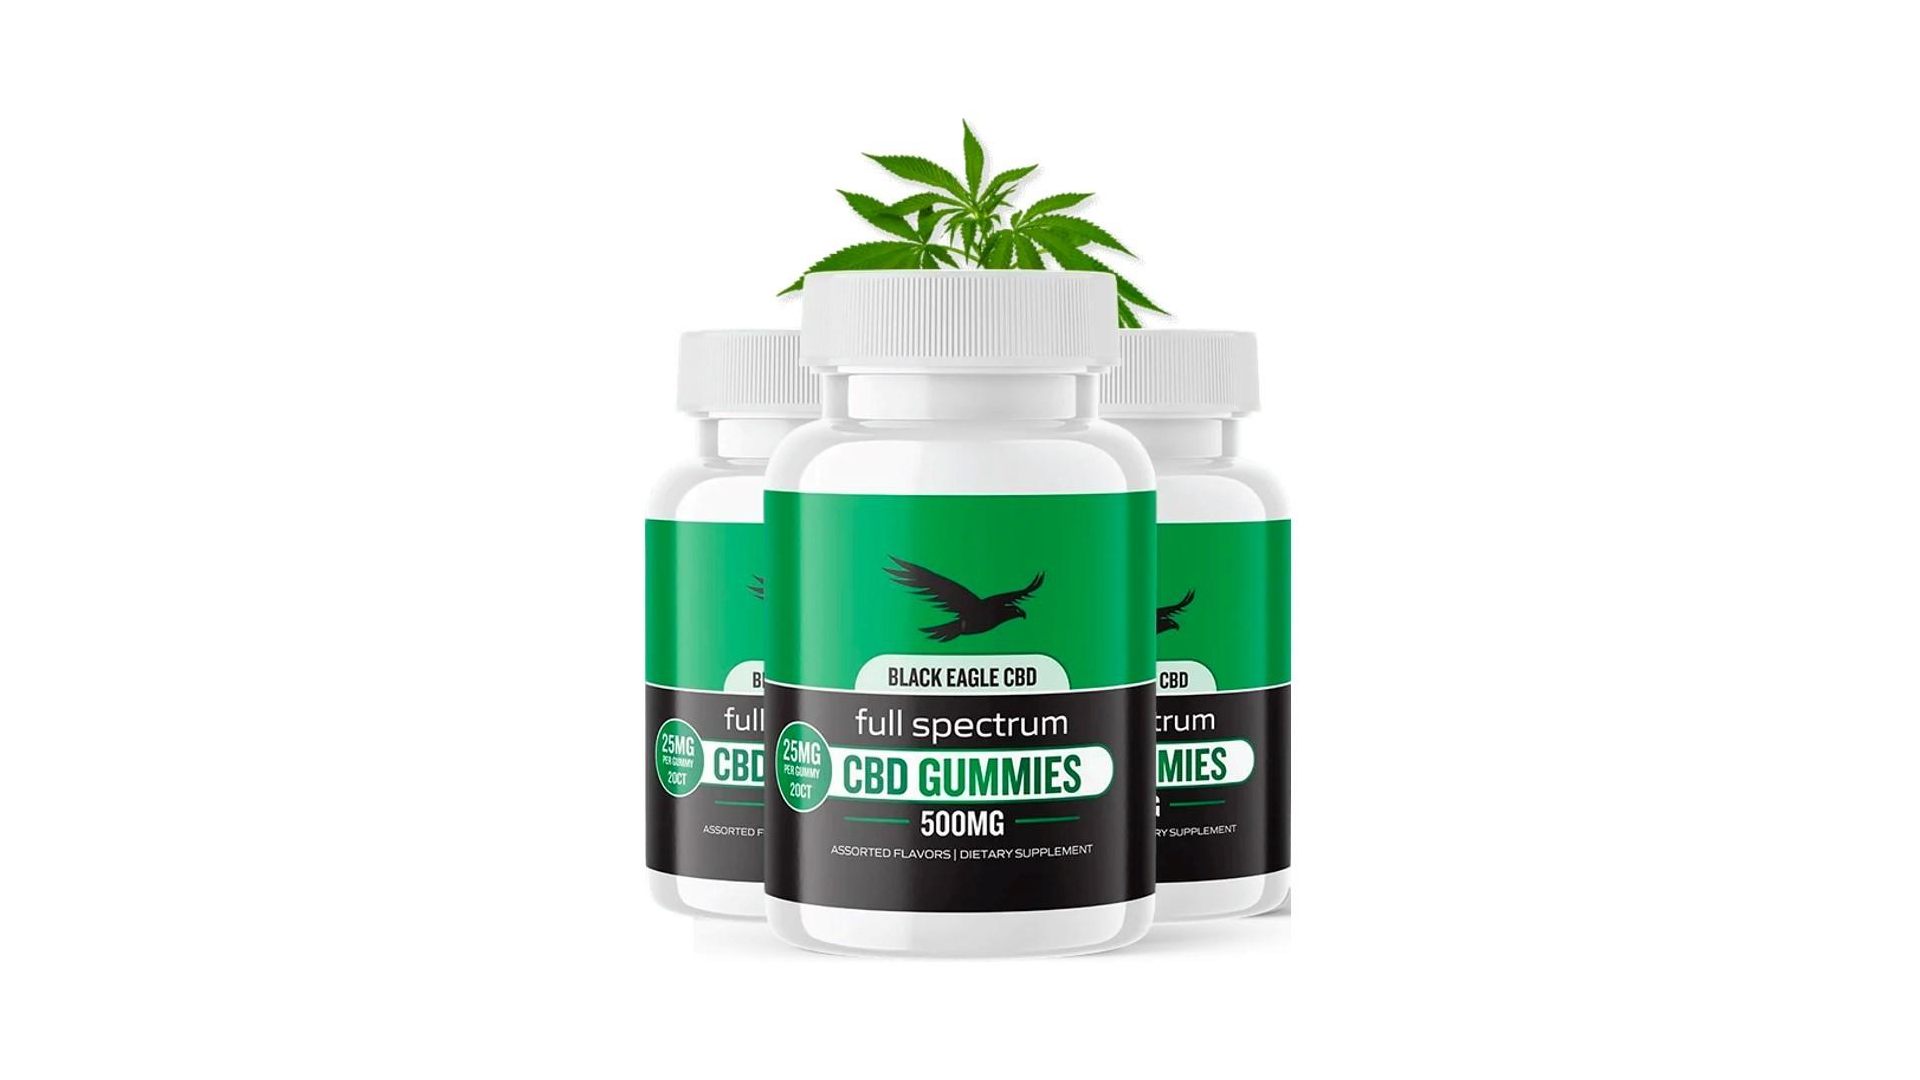 Black Eagle CBD Reviews – An In-Depth Review and Analysis